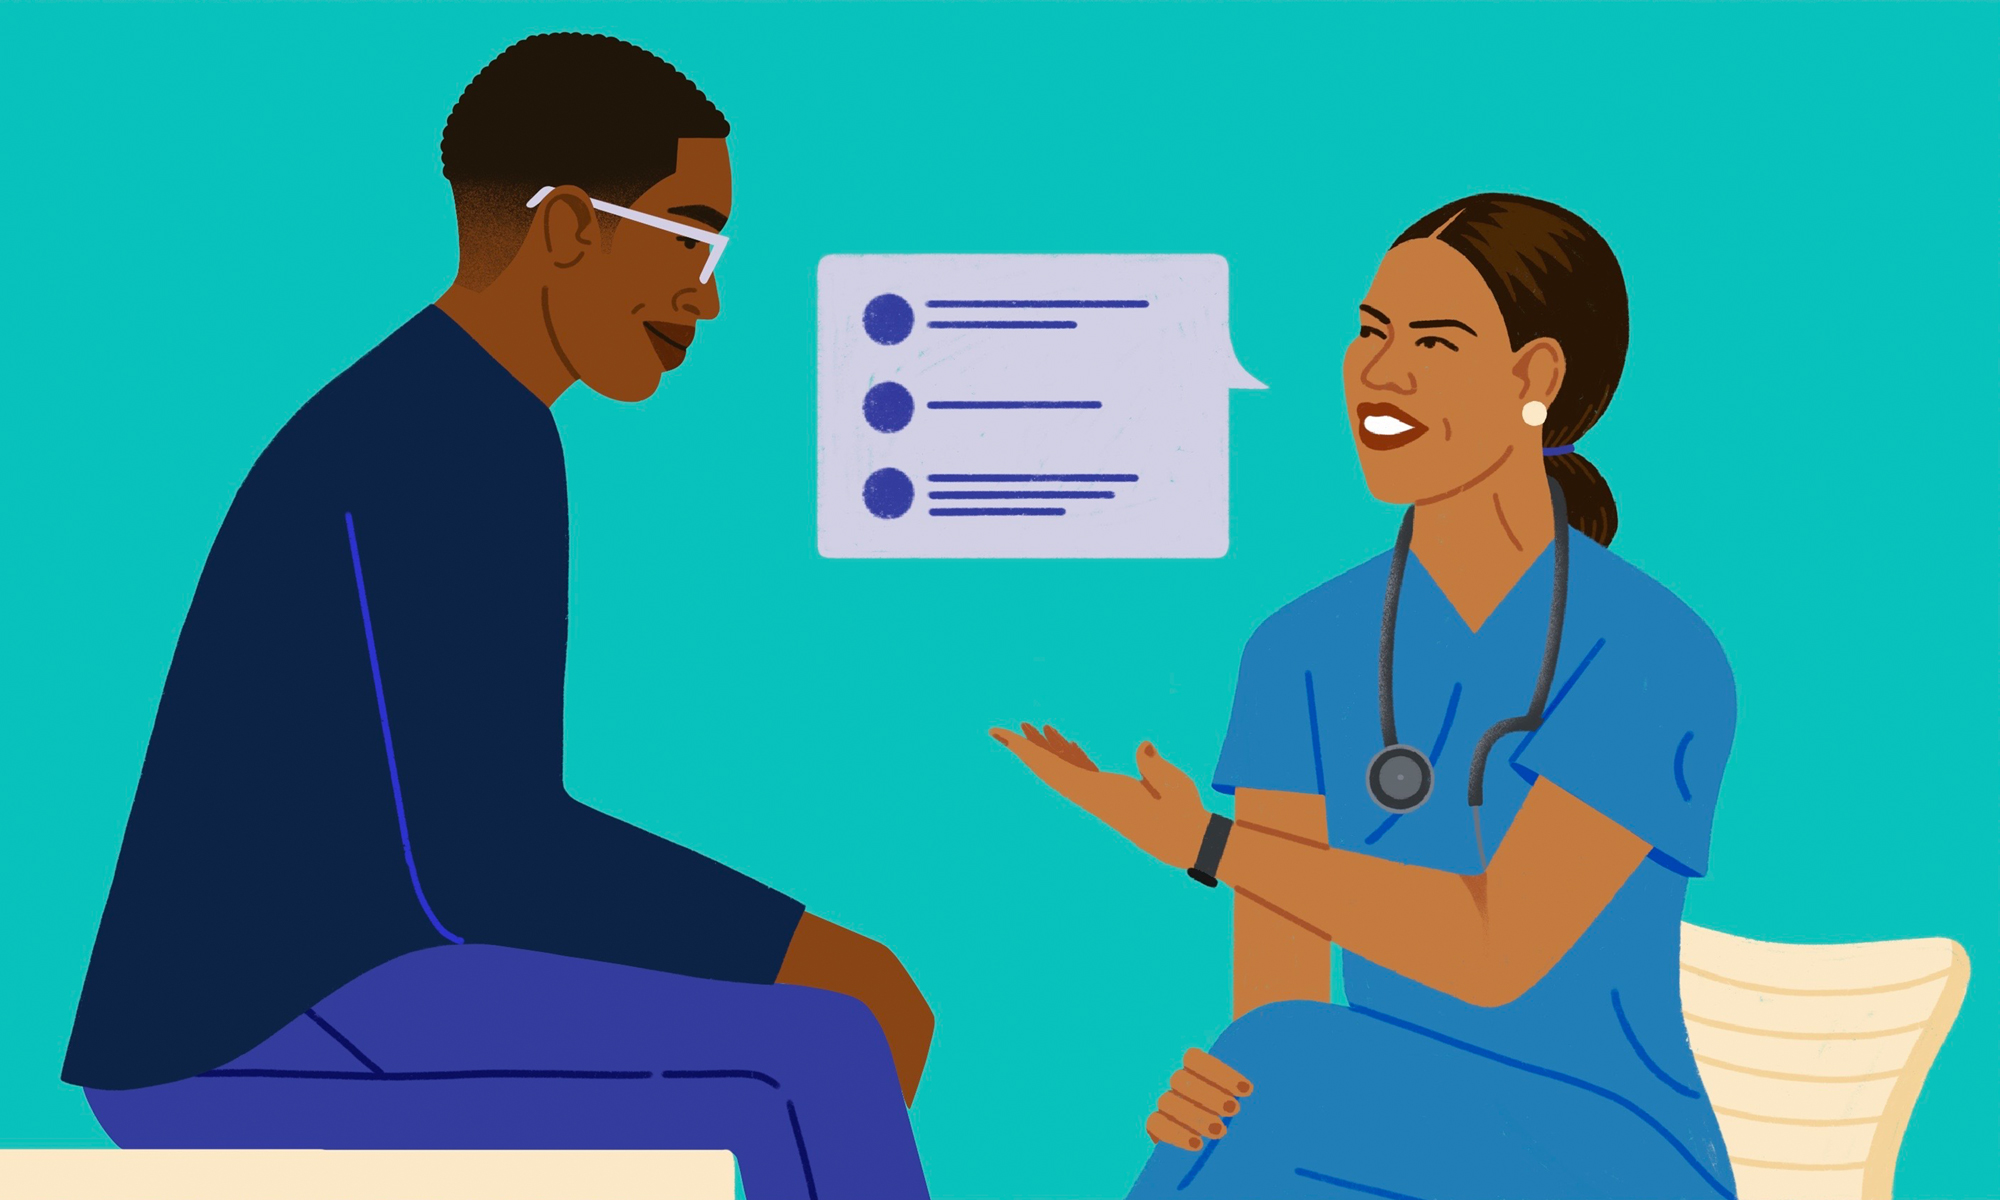 Vector illustration of a doctor discussing healthcare options with a patient